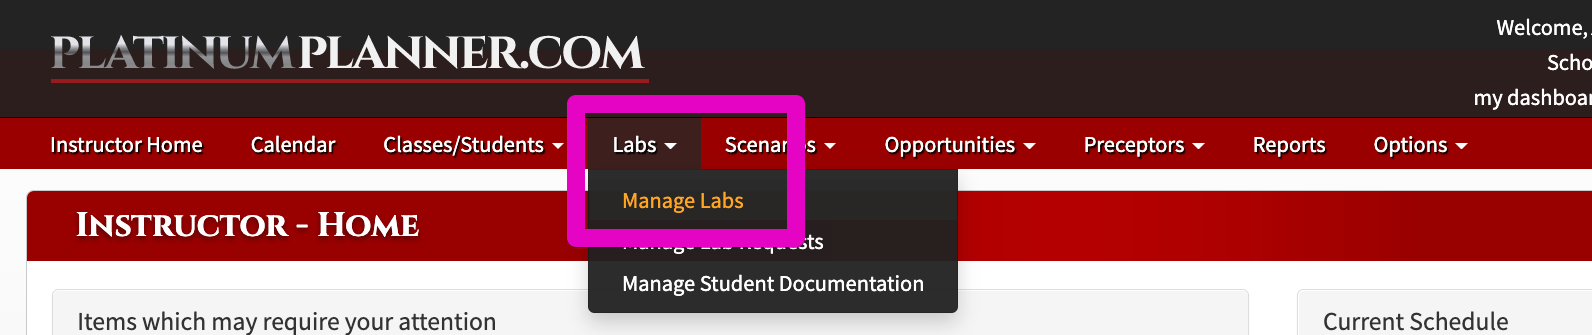 1_12_manage_labs.png